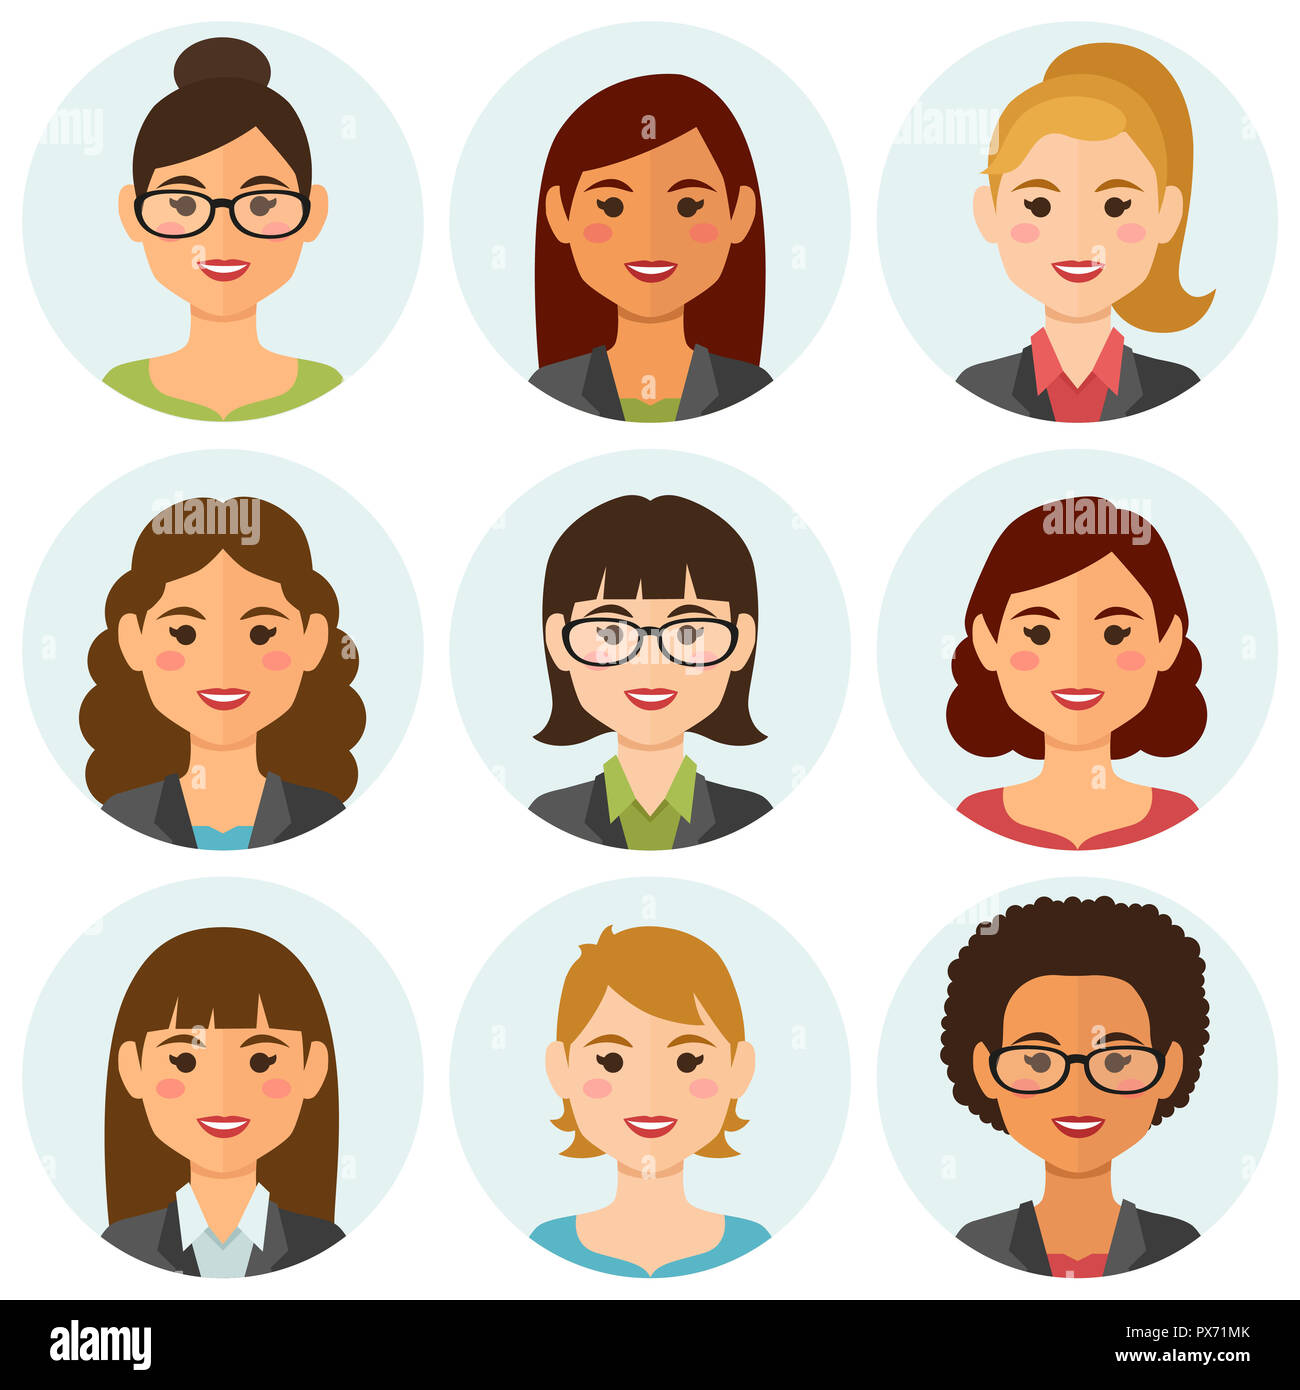 Businesswoman character avatar icon Royalty Free Vector